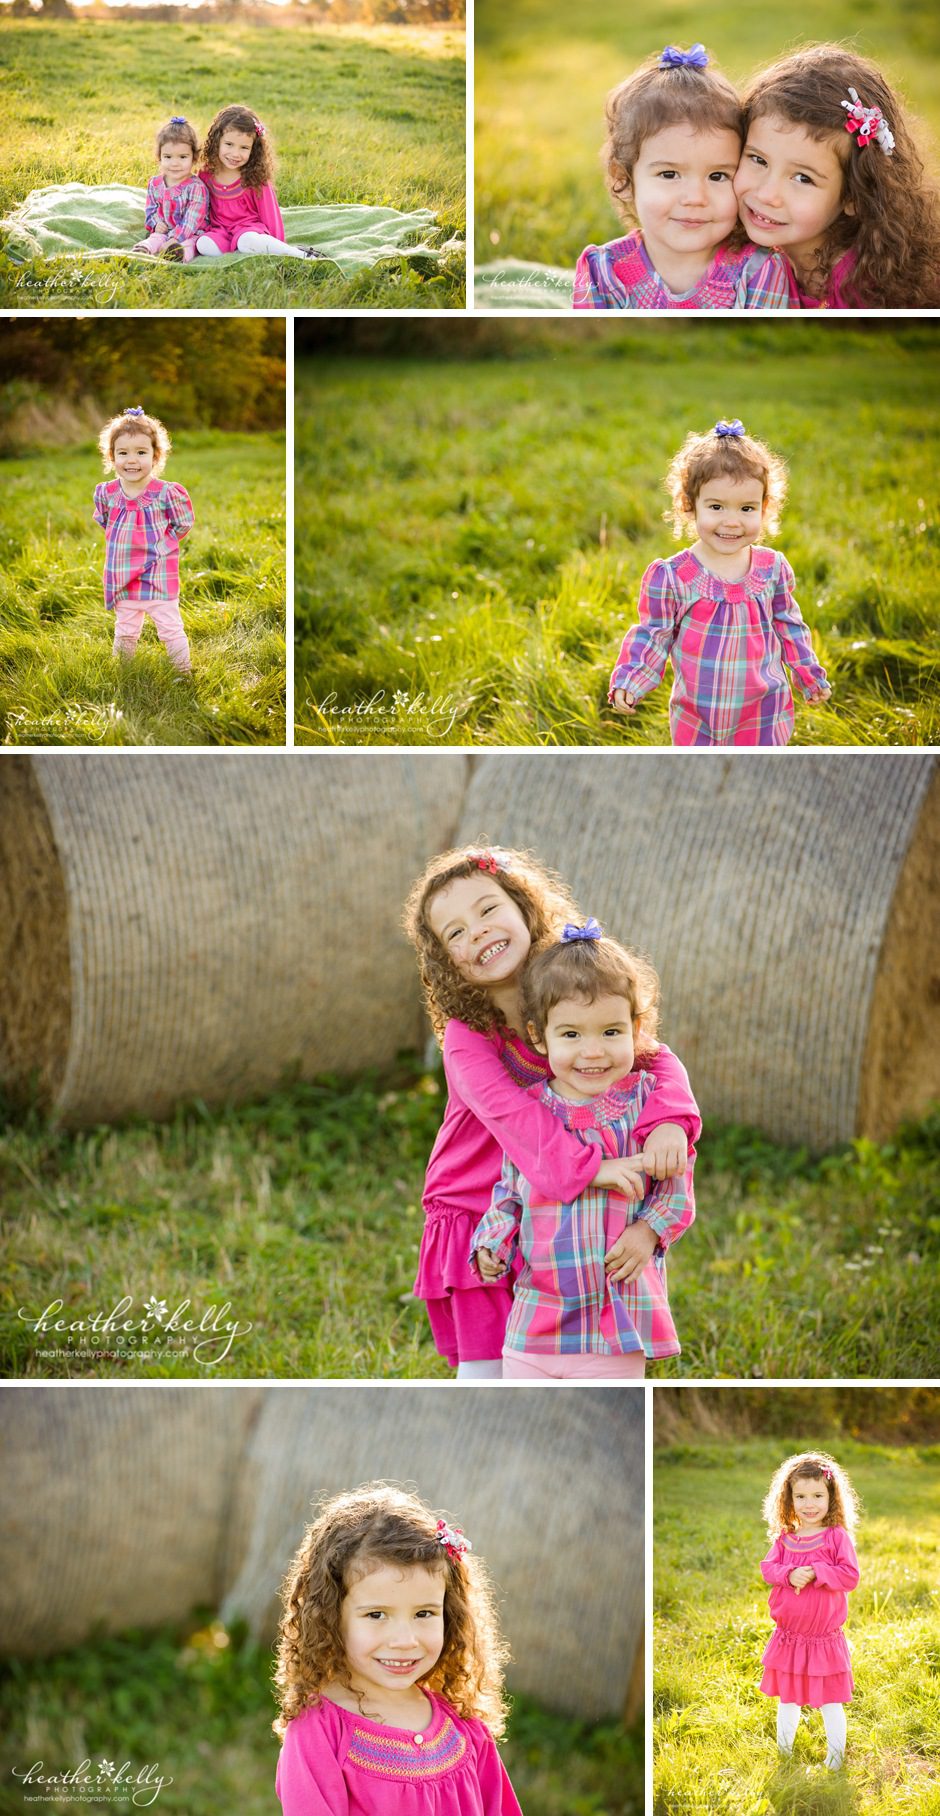 ct family photographer - heather kelly photography - brookfield connecticut - family photography